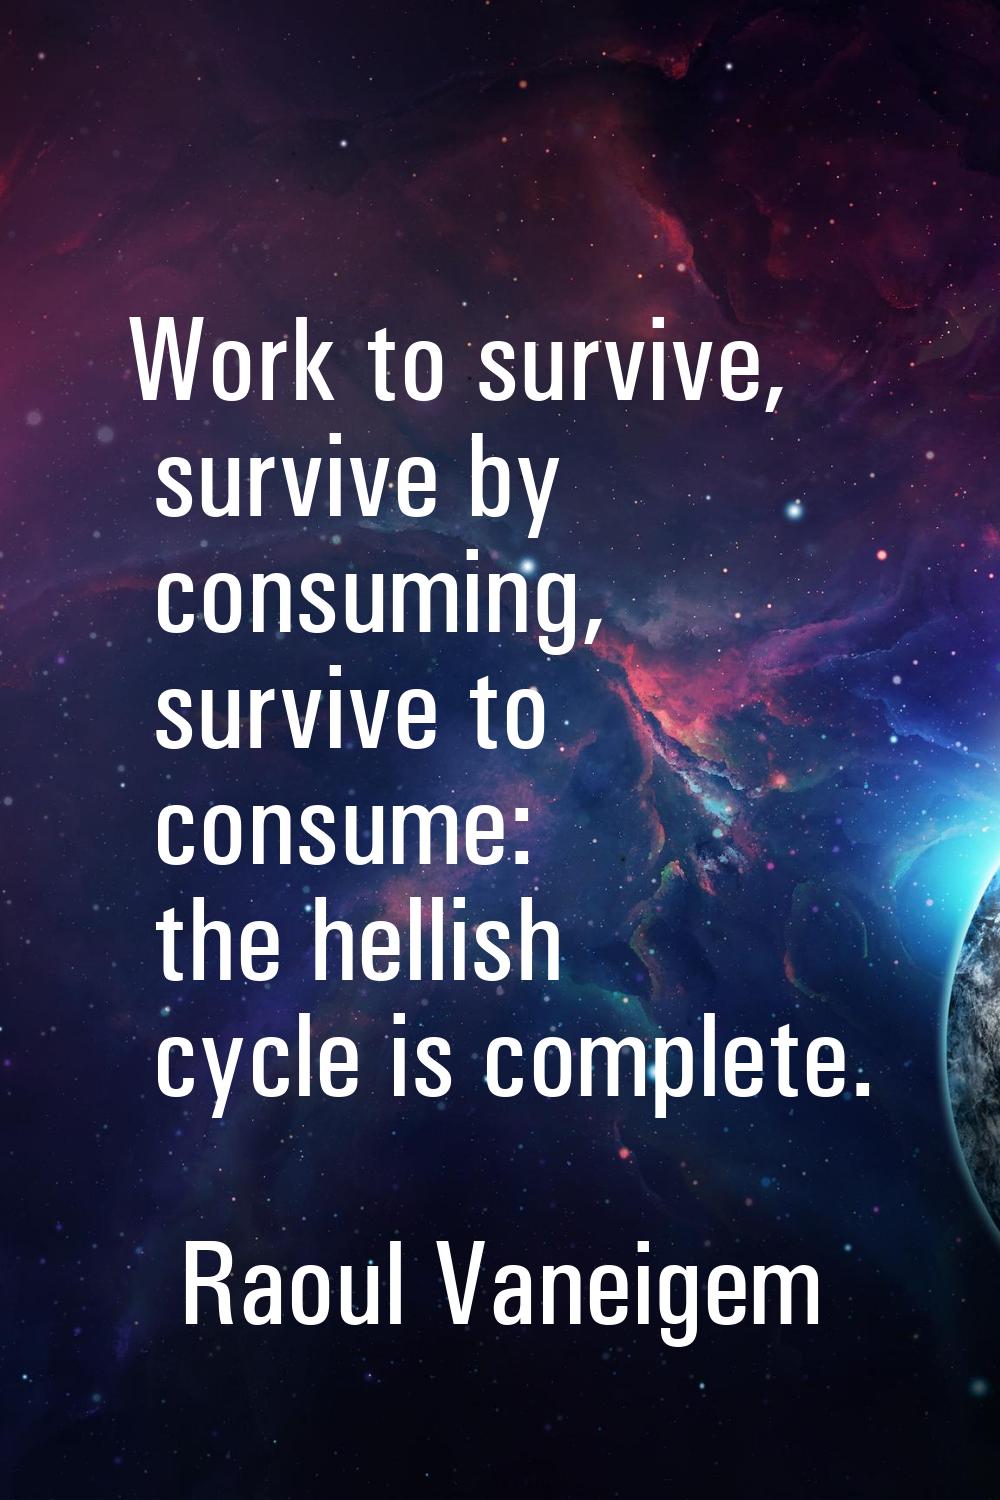 Work to survive, survive by consuming, survive to consume: the hellish cycle is complete.